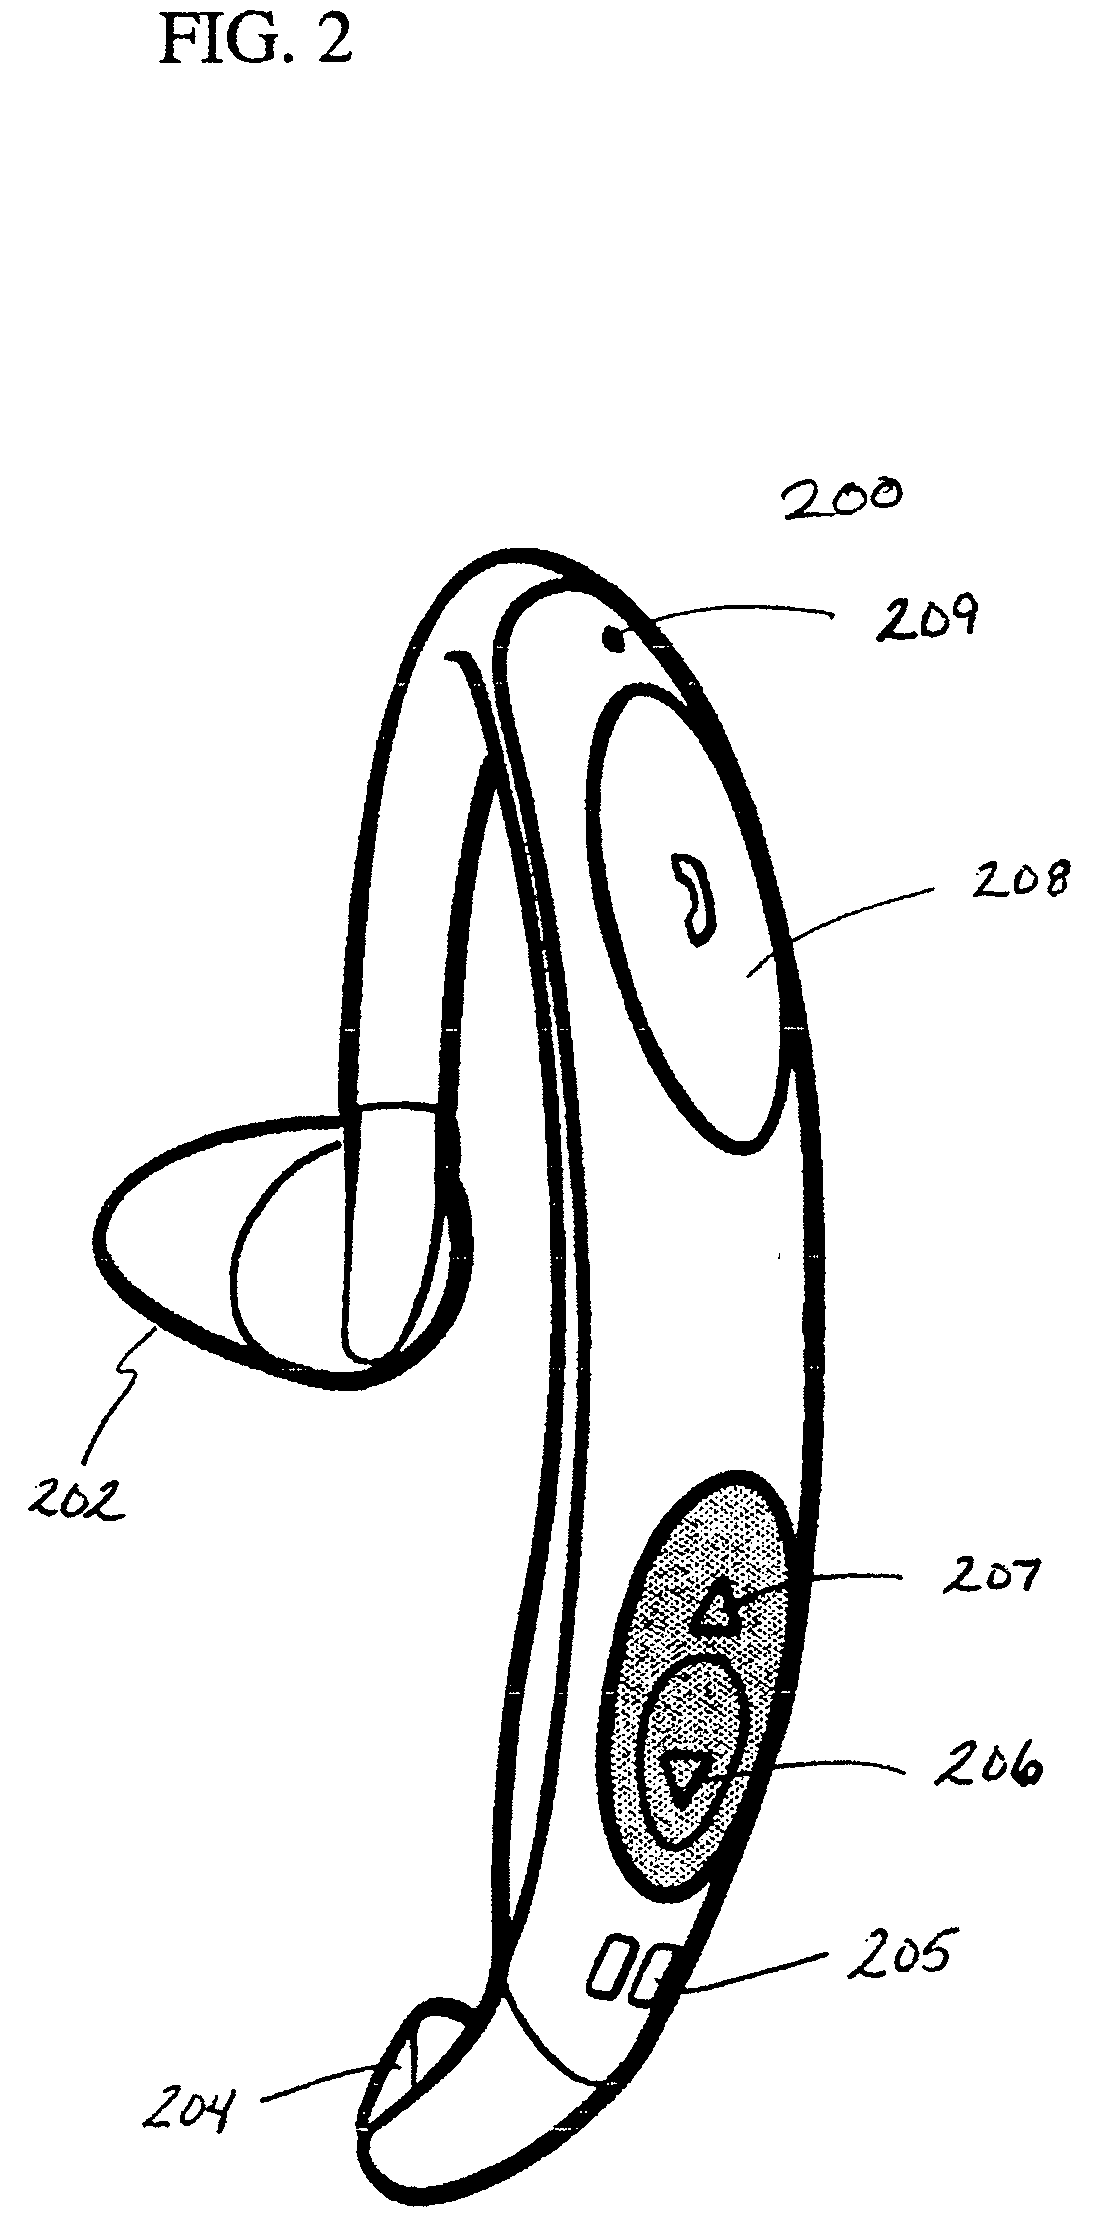 System and method for pairing wireless headsets and headphones